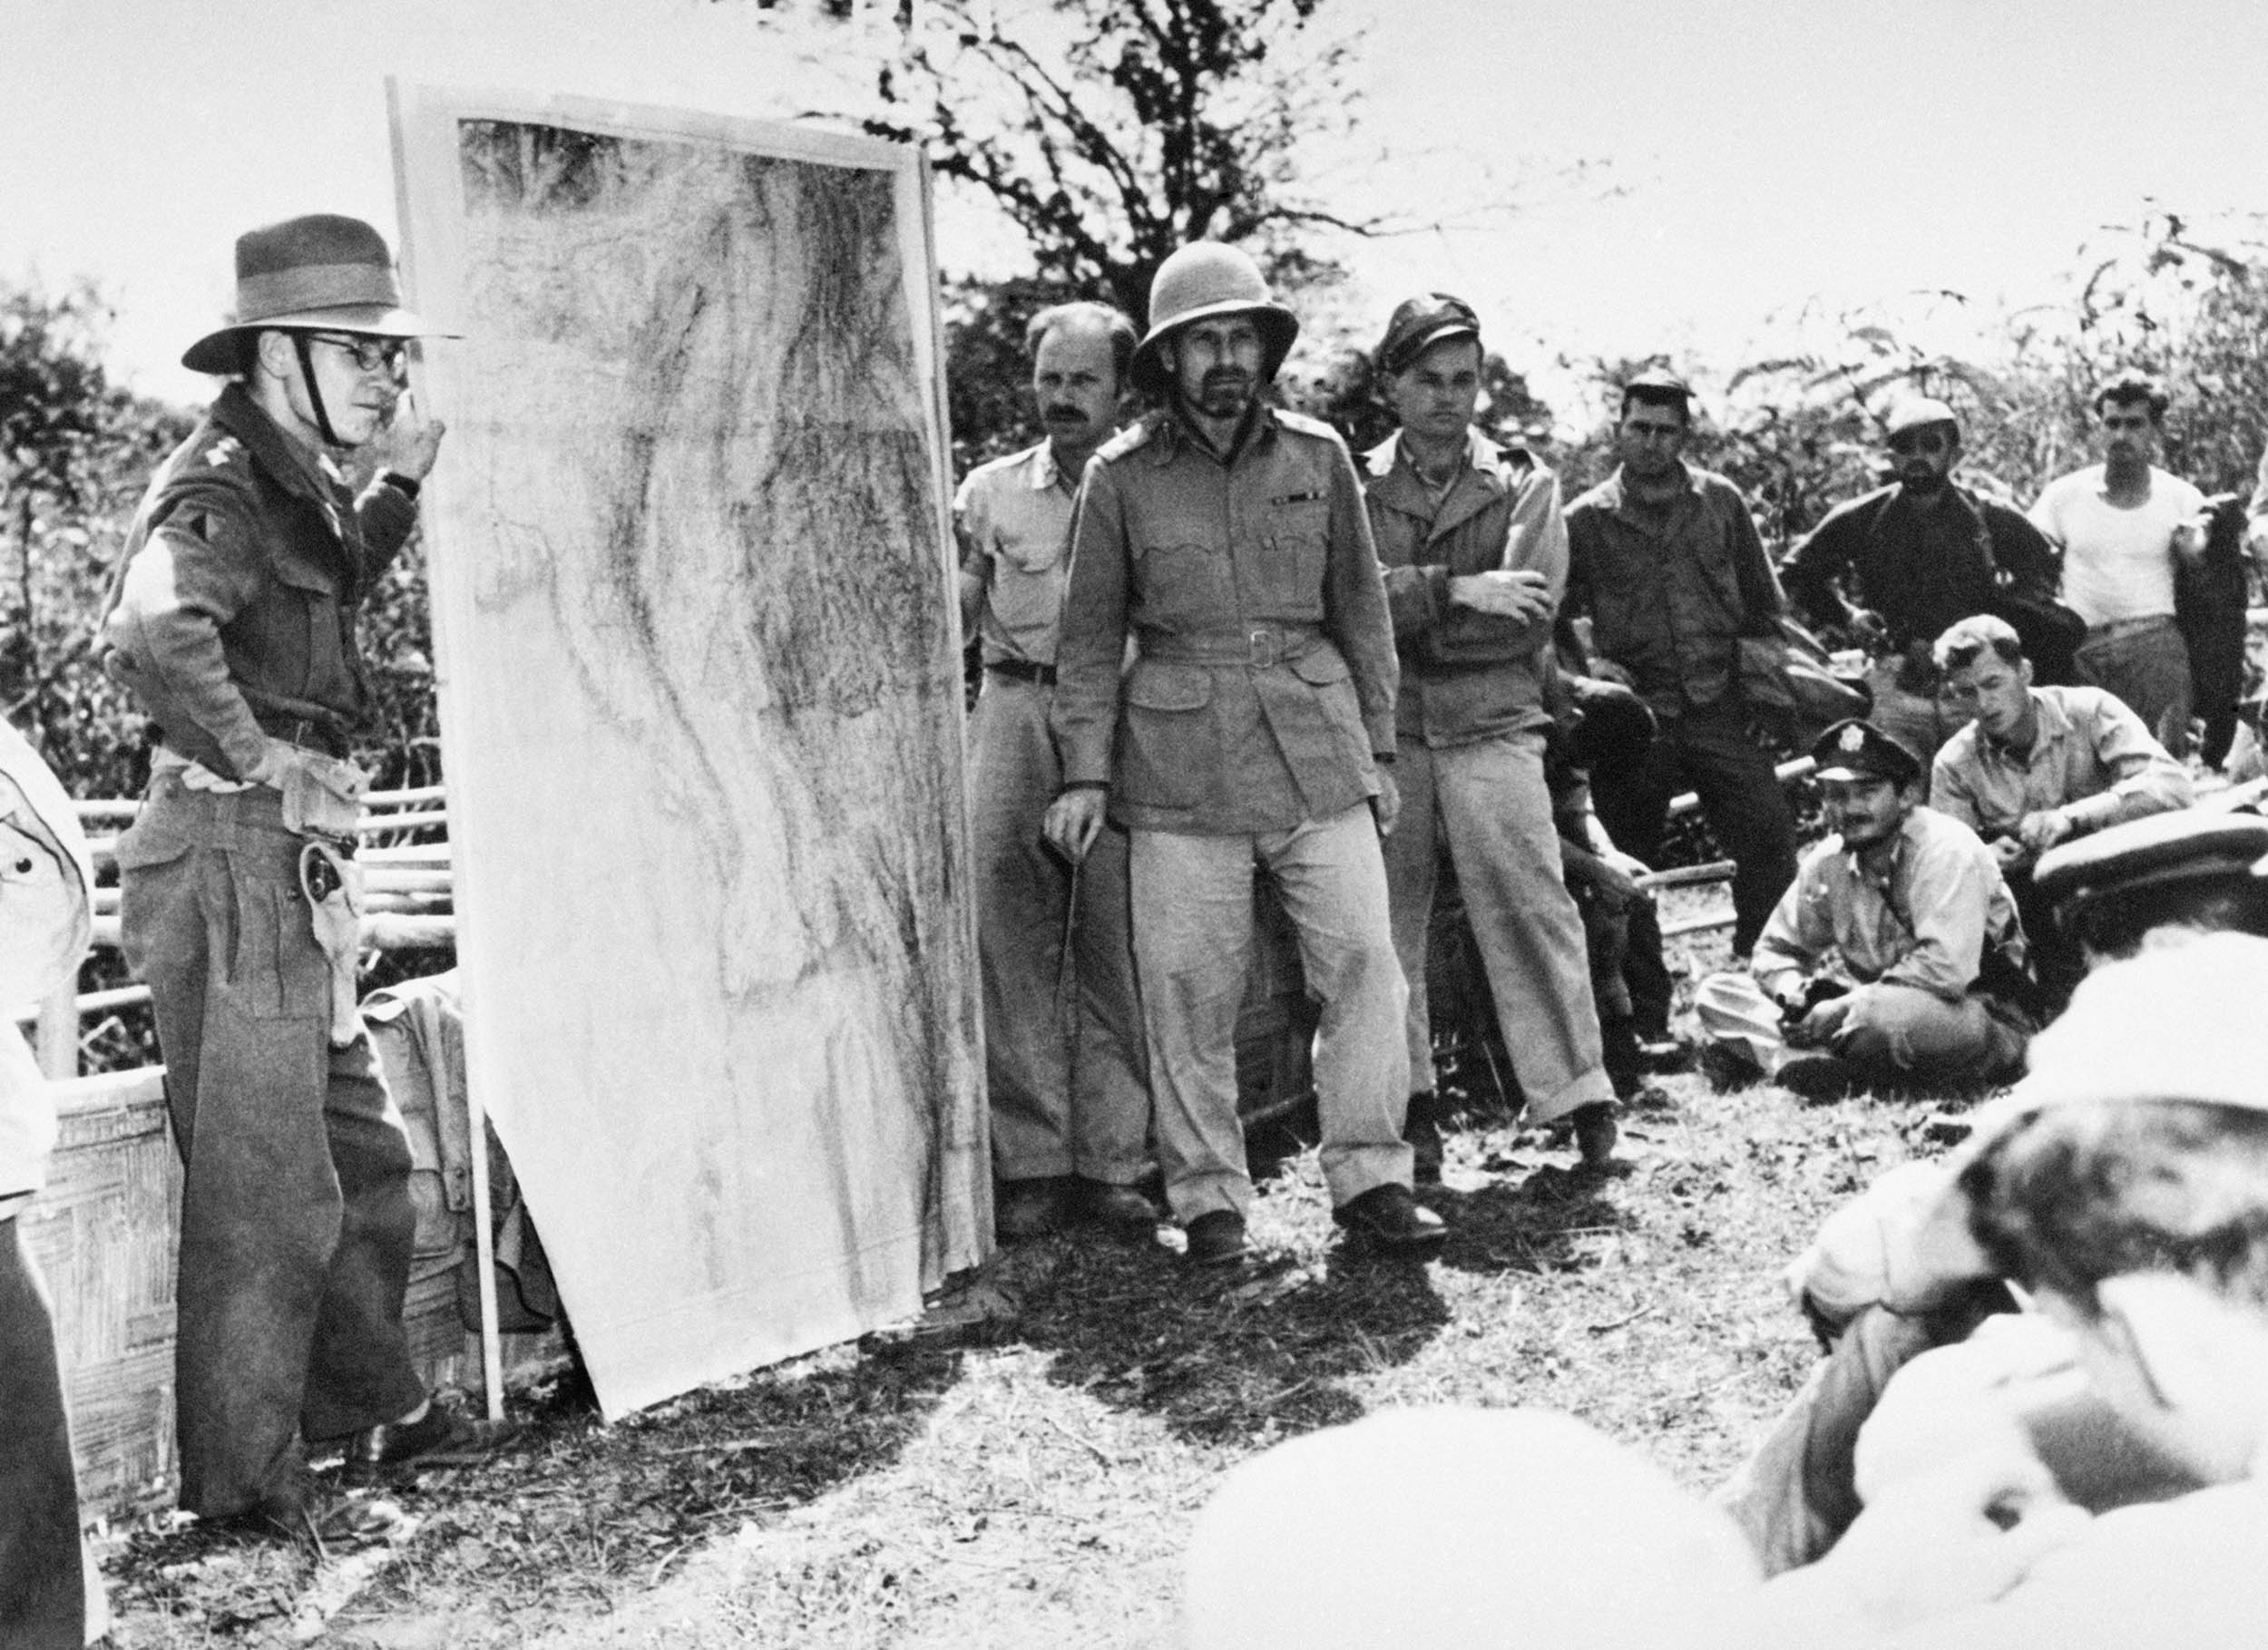 Chindits commander General Orde Wingate (wearing pith helmet) briefs members of 1st Air Commando, U.S. Army Air Force, in Burma, circa 1944 (PA Images/Alamy)